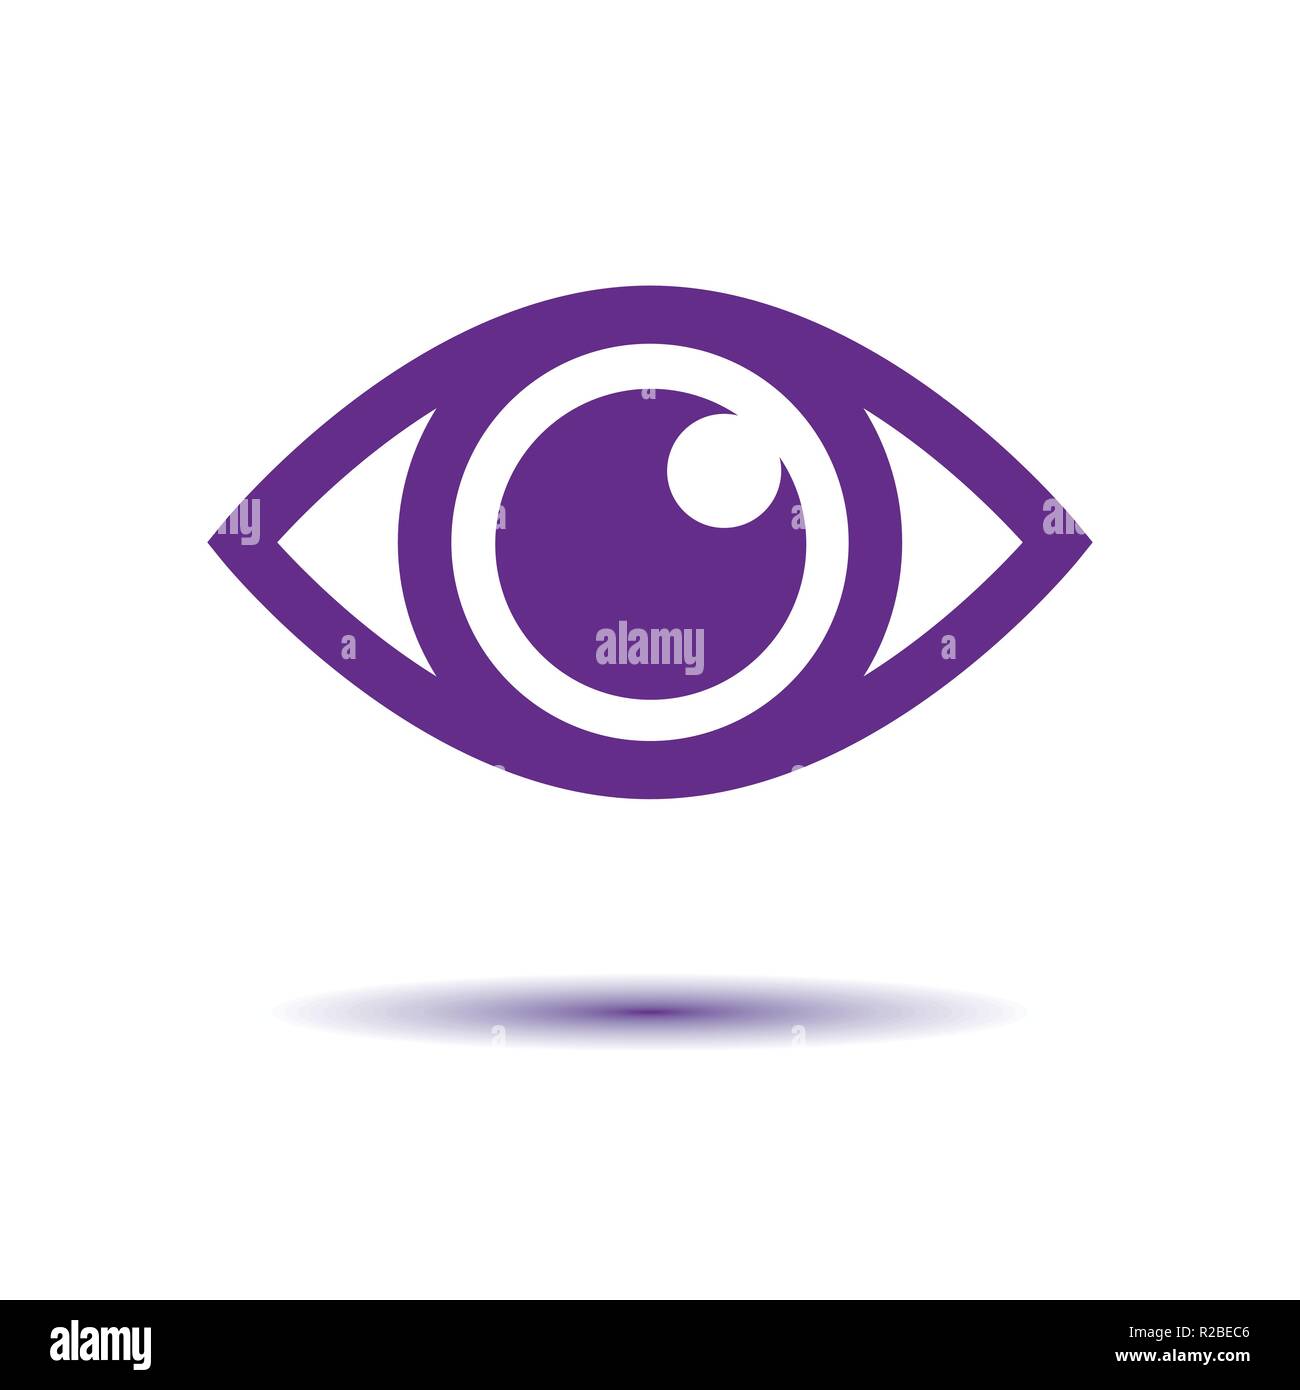 Simple eye icon vector. Round flare. Medicine symbol isolated. Safety and search concept. Laconic graphic design element. Eyesight pictogram. Isolated on white. Stock Vector